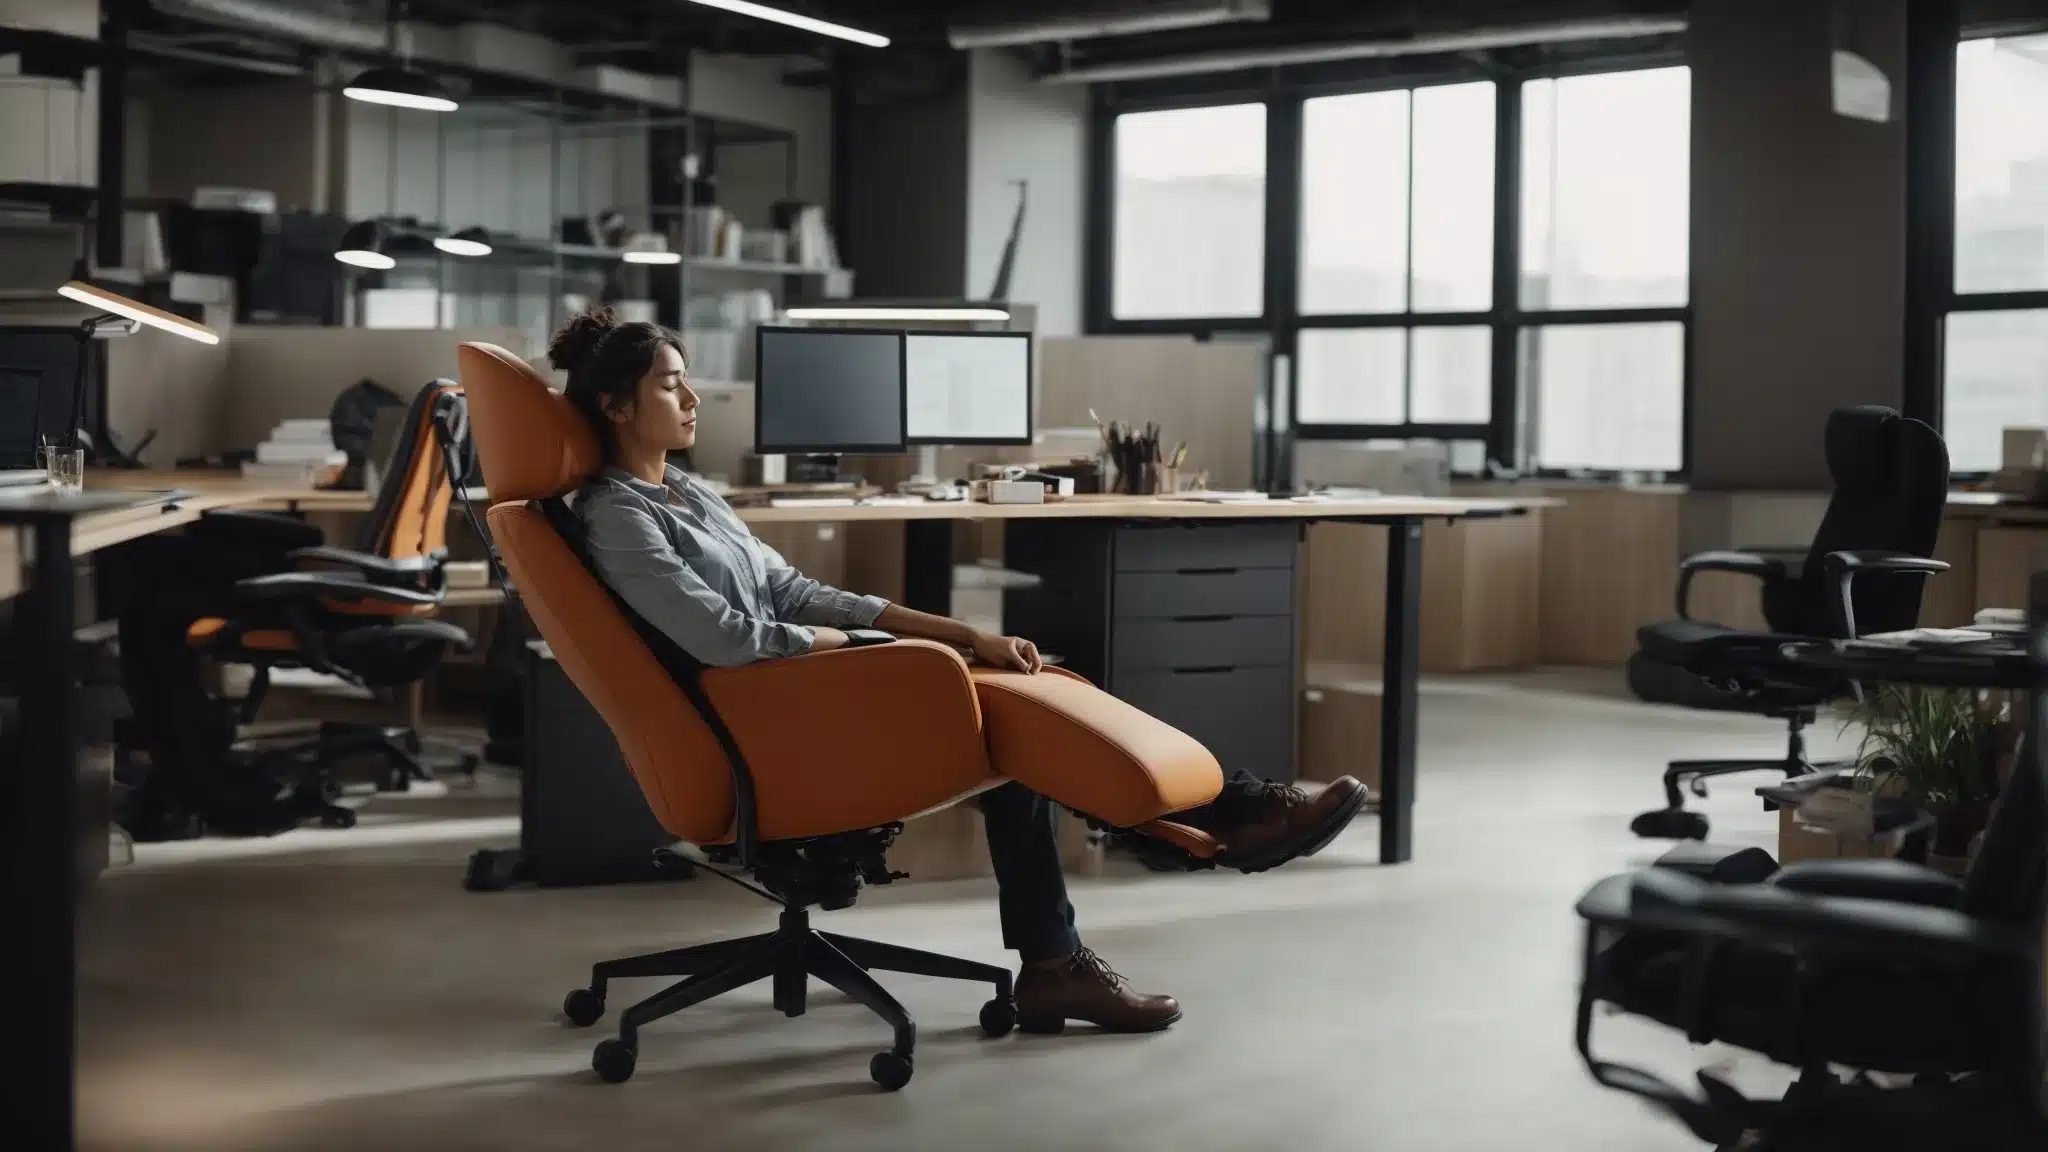 A Worker Reclining In An Ergonomic Office Chair, Taking A Deep Breath With Eyes Closed Amidst A Serene And Organized Workspace.